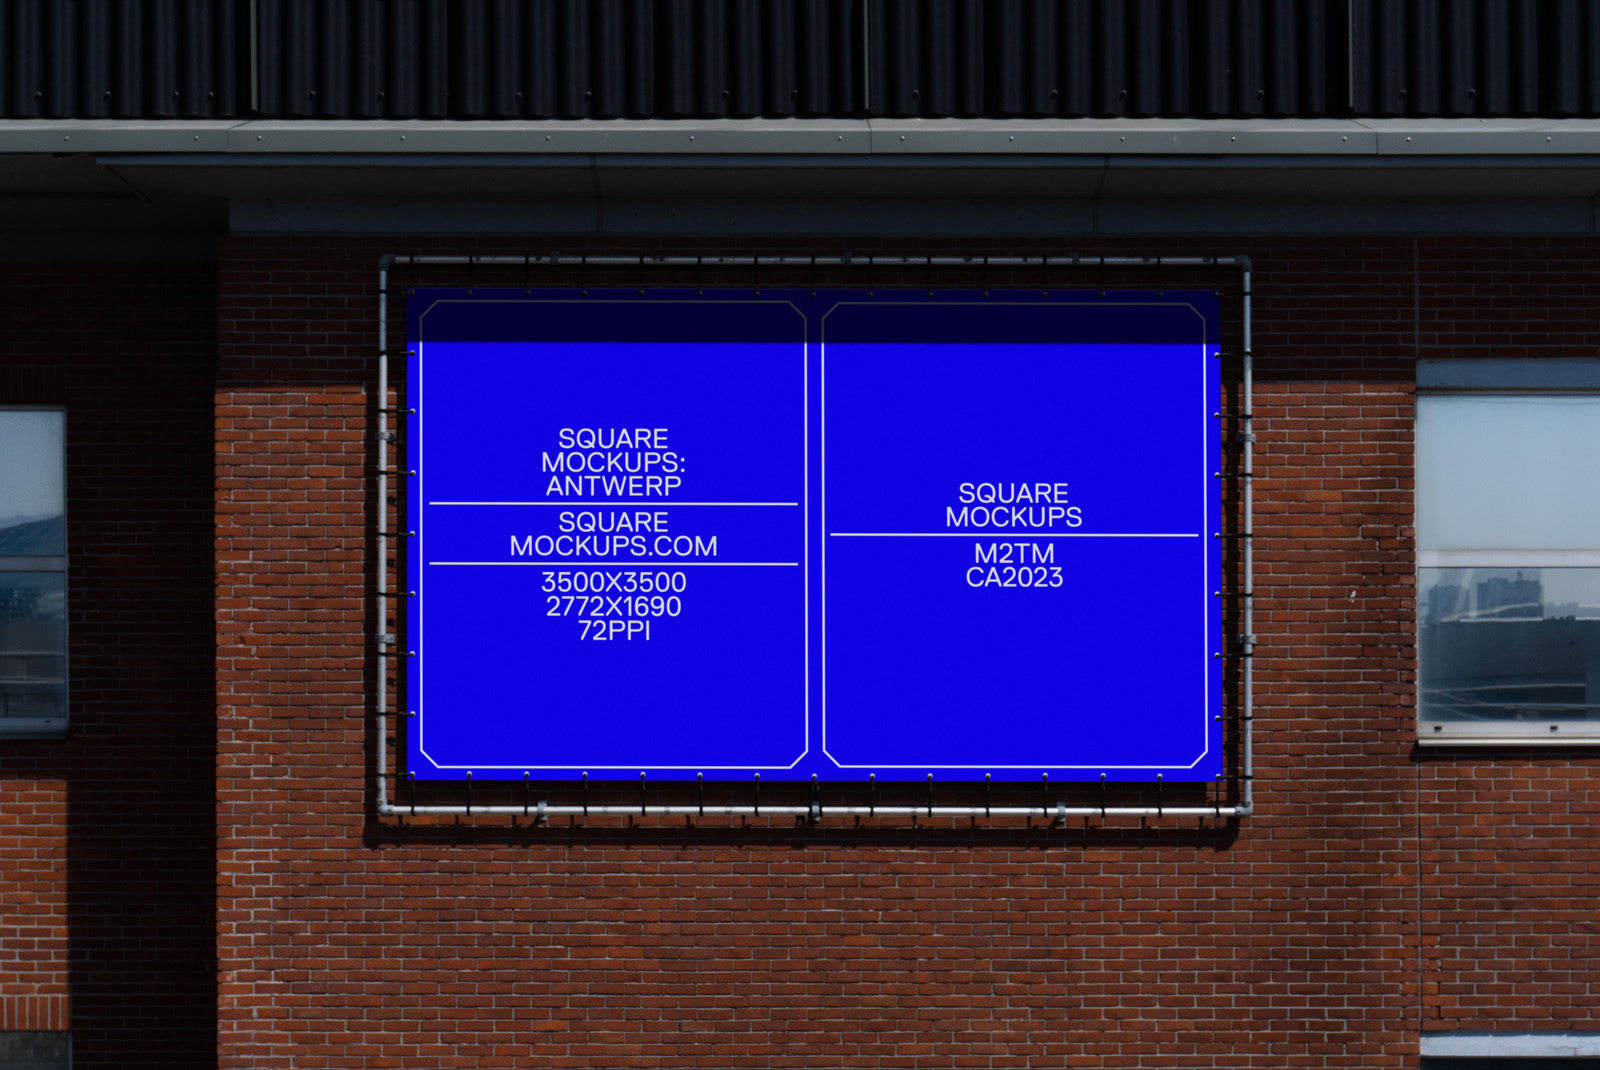 Outdoor billboard mockup on brick building facade displaying two square ad spaces for design presentation, in daylight with clear visibility for designers.